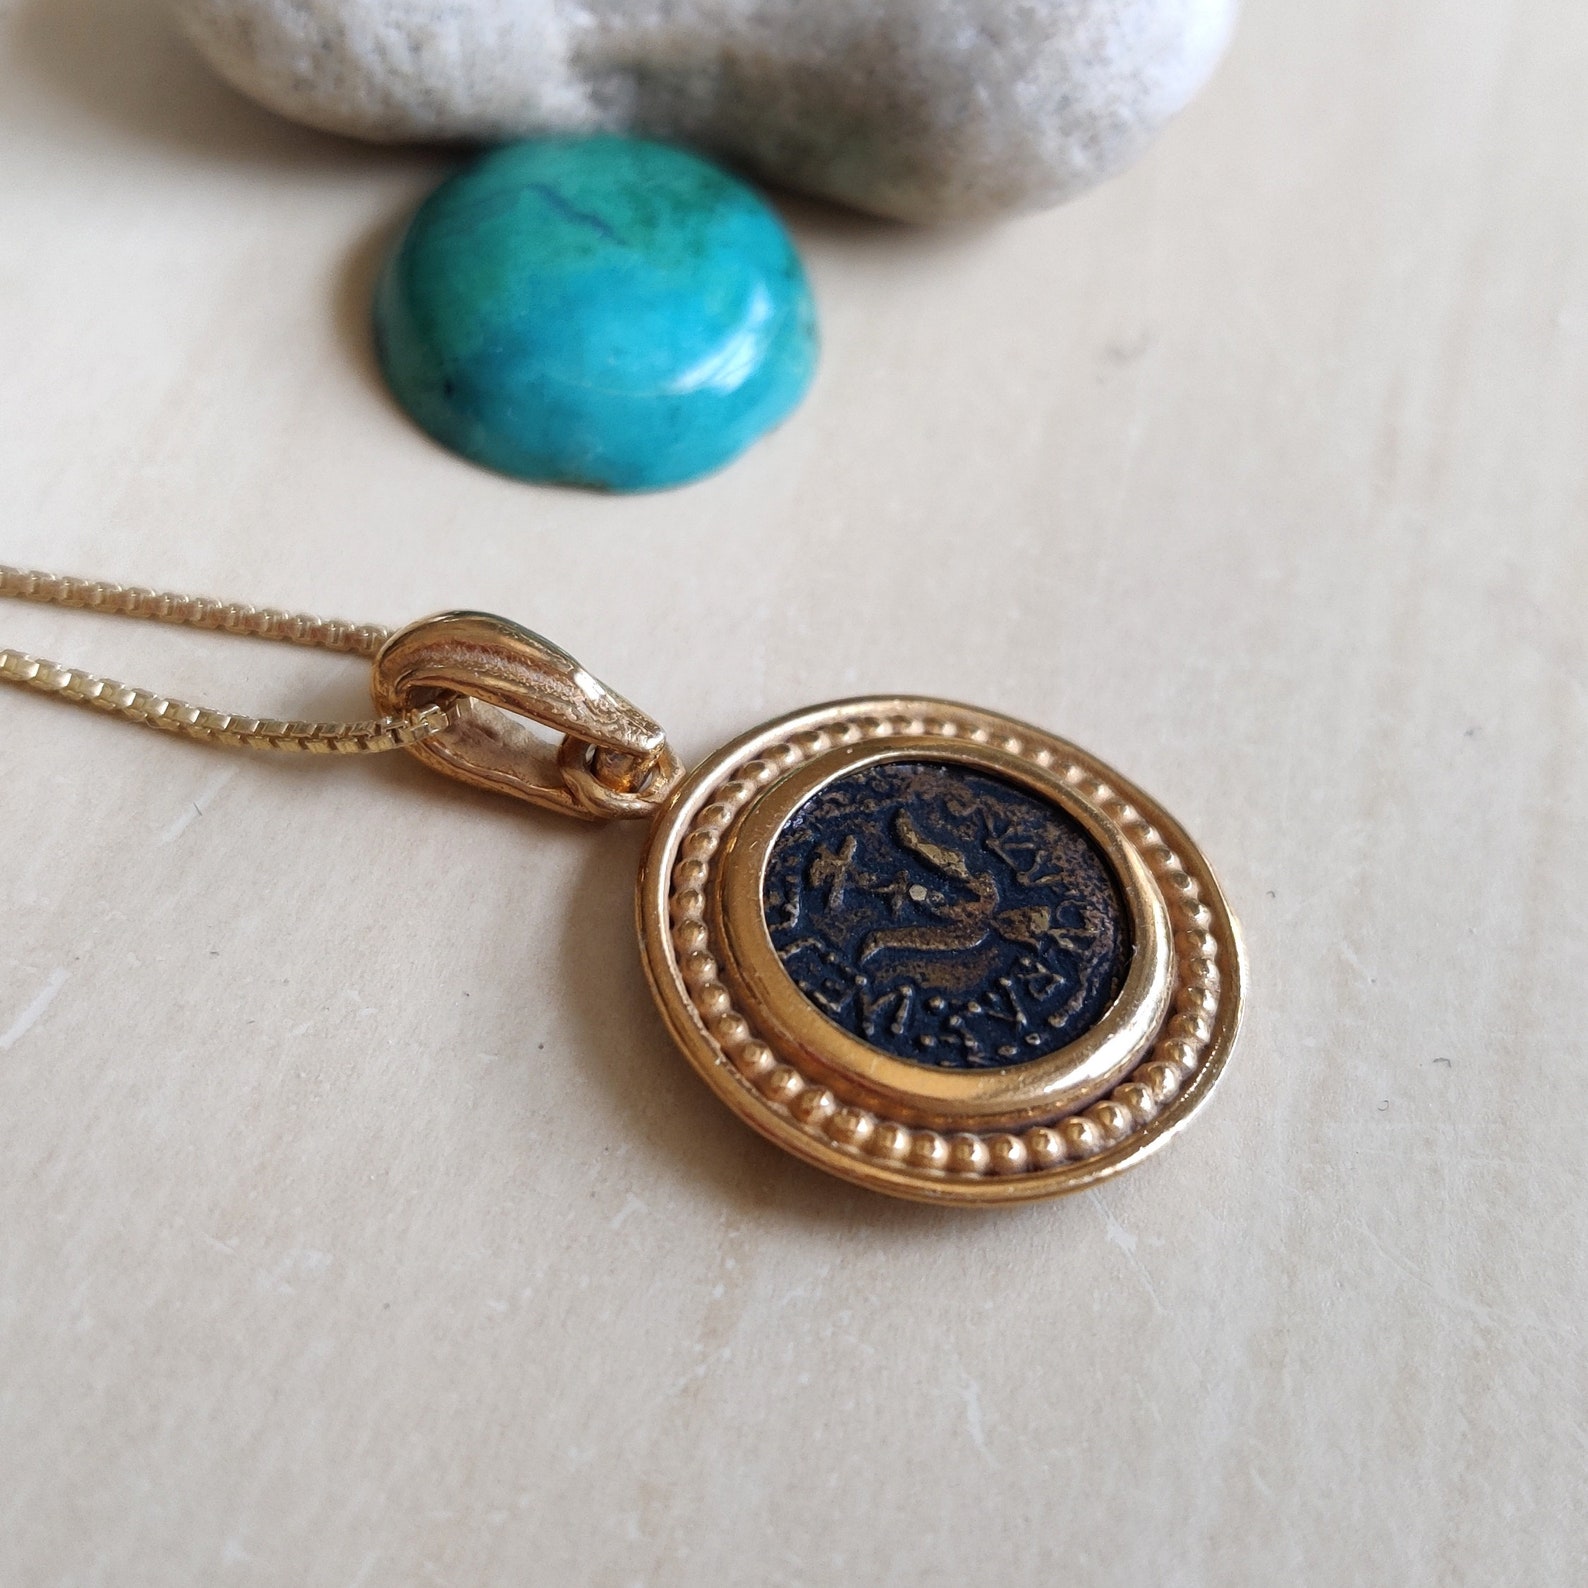 Widow's Mite Coin Replica Gold Necklace Ancient Coin - Etsy